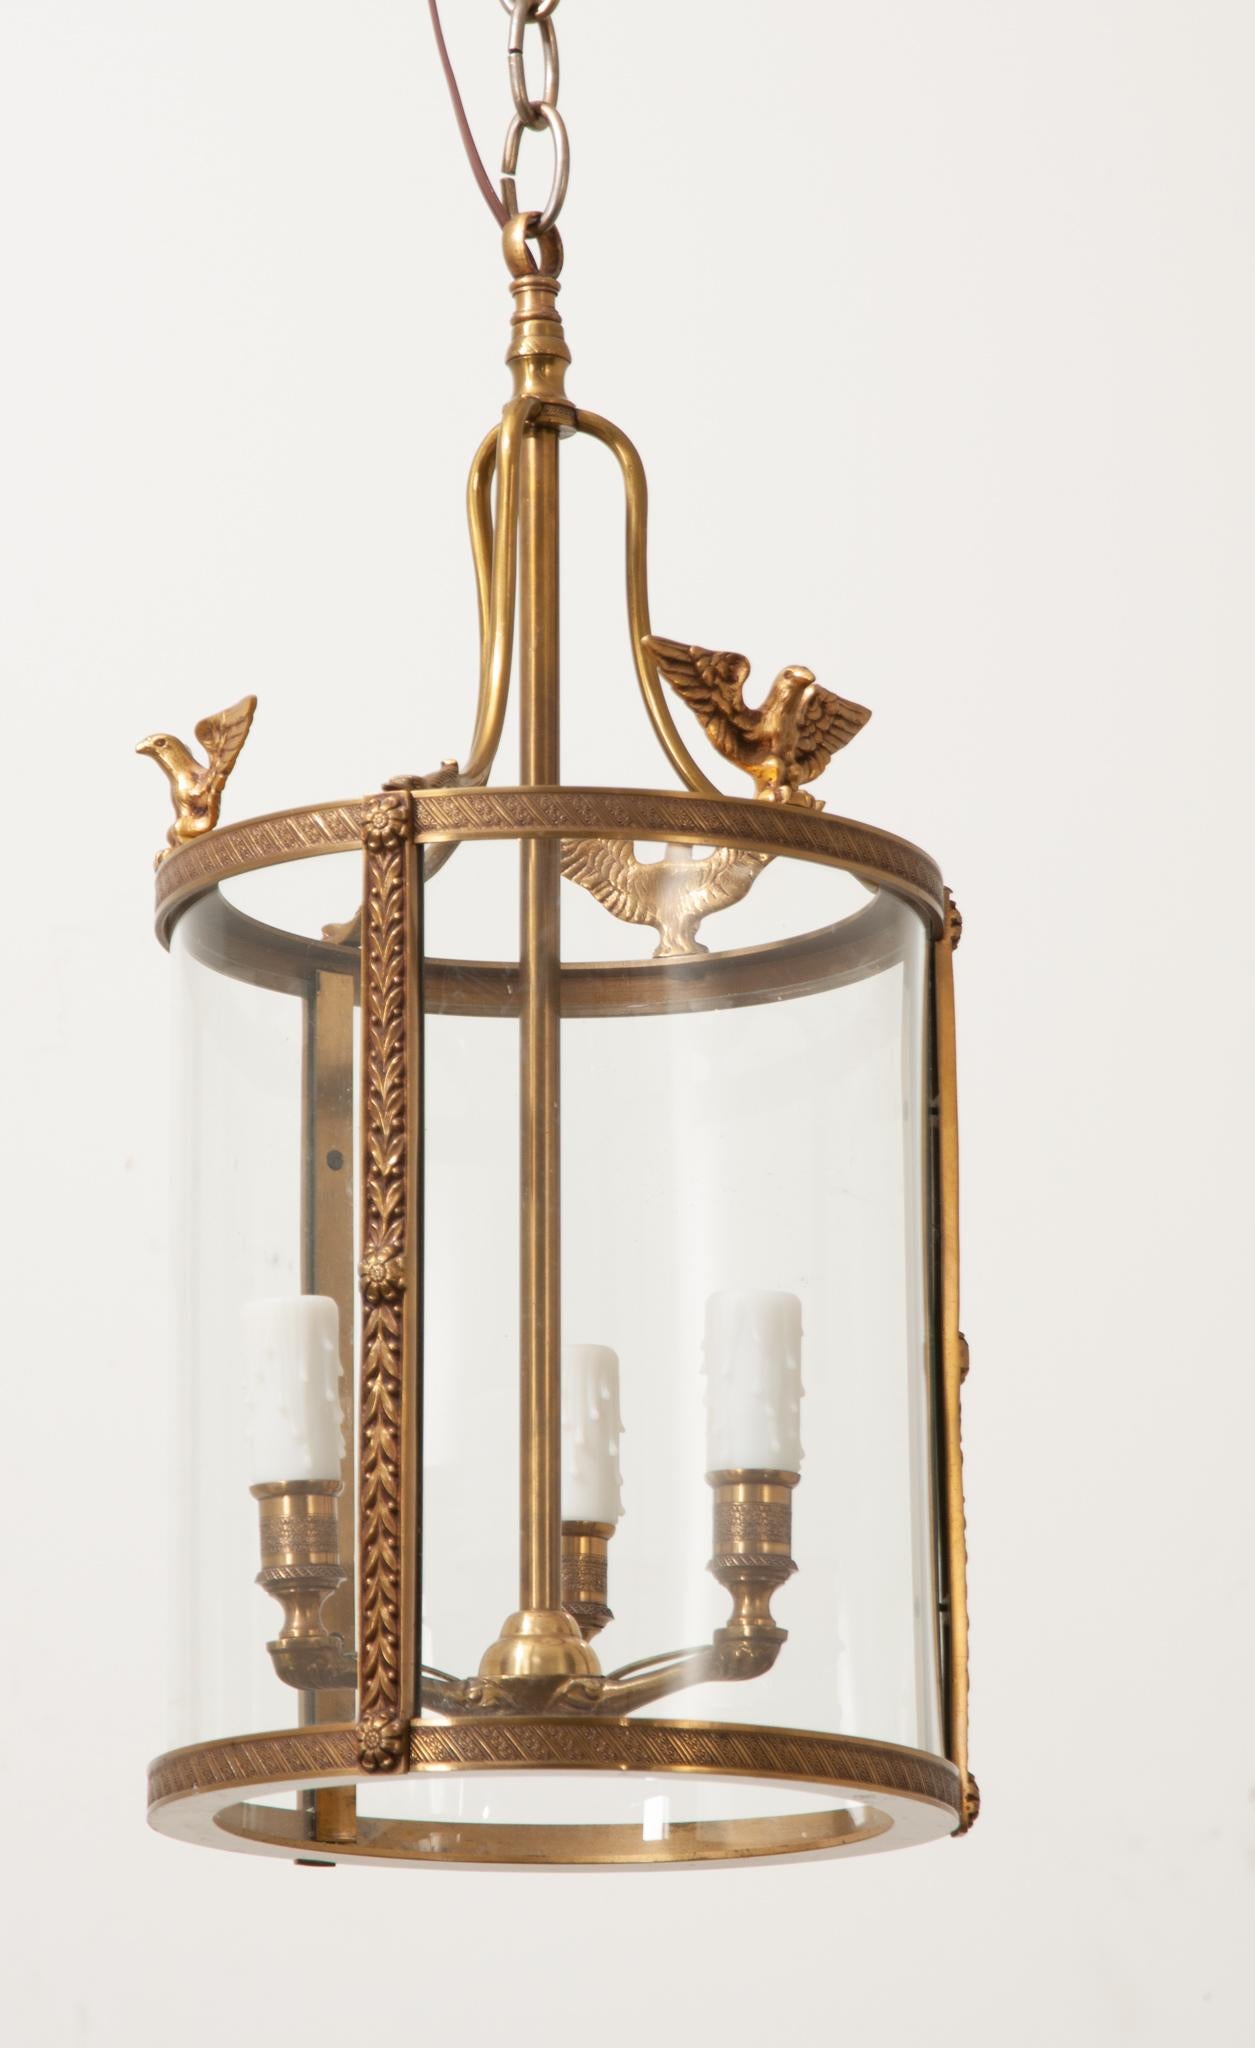 Cast French Brass Decorative Lantern with Eagles